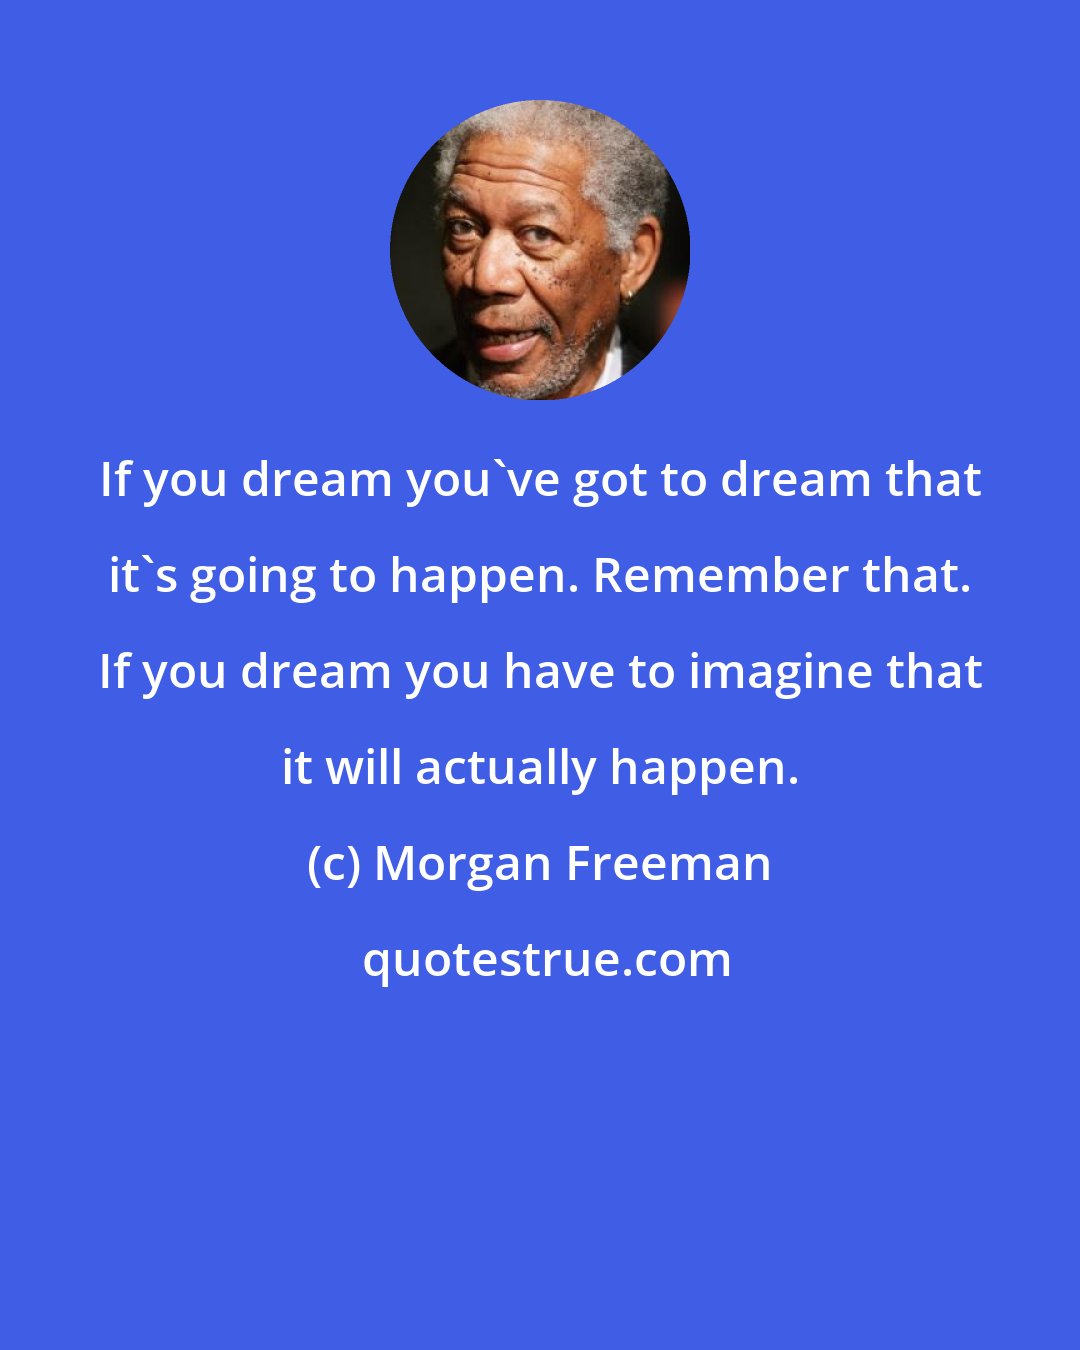 Morgan Freeman: If you dream you've got to dream that it's going to happen. Remember that. If you dream you have to imagine that it will actually happen.